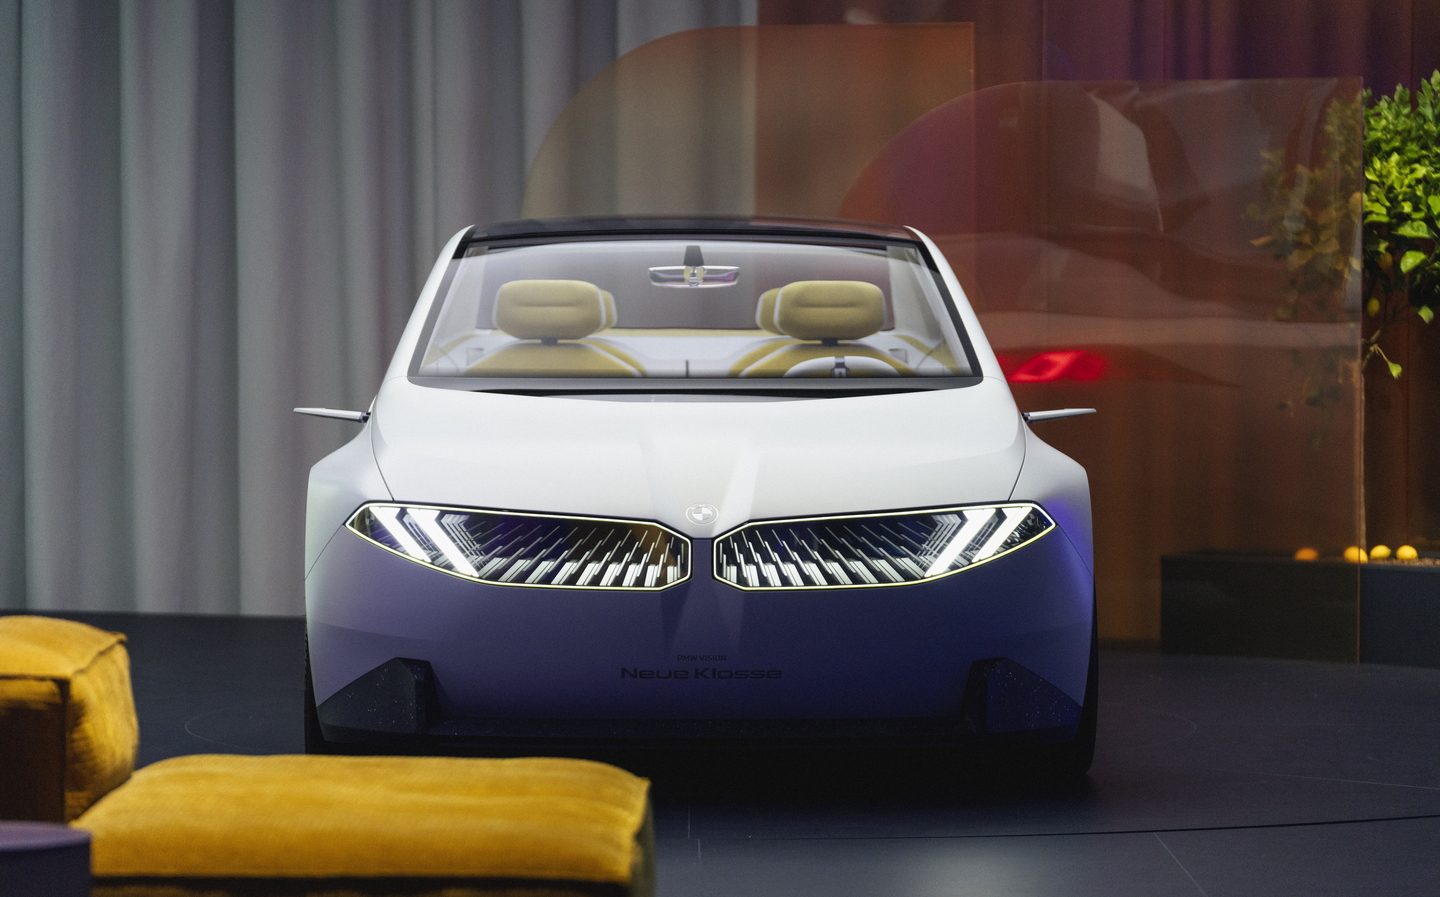 concept, electric cars, munich motor show, neue klasse, vision, bmw vision neue klasse concept offers a look at future 3 series with next-gen electric power